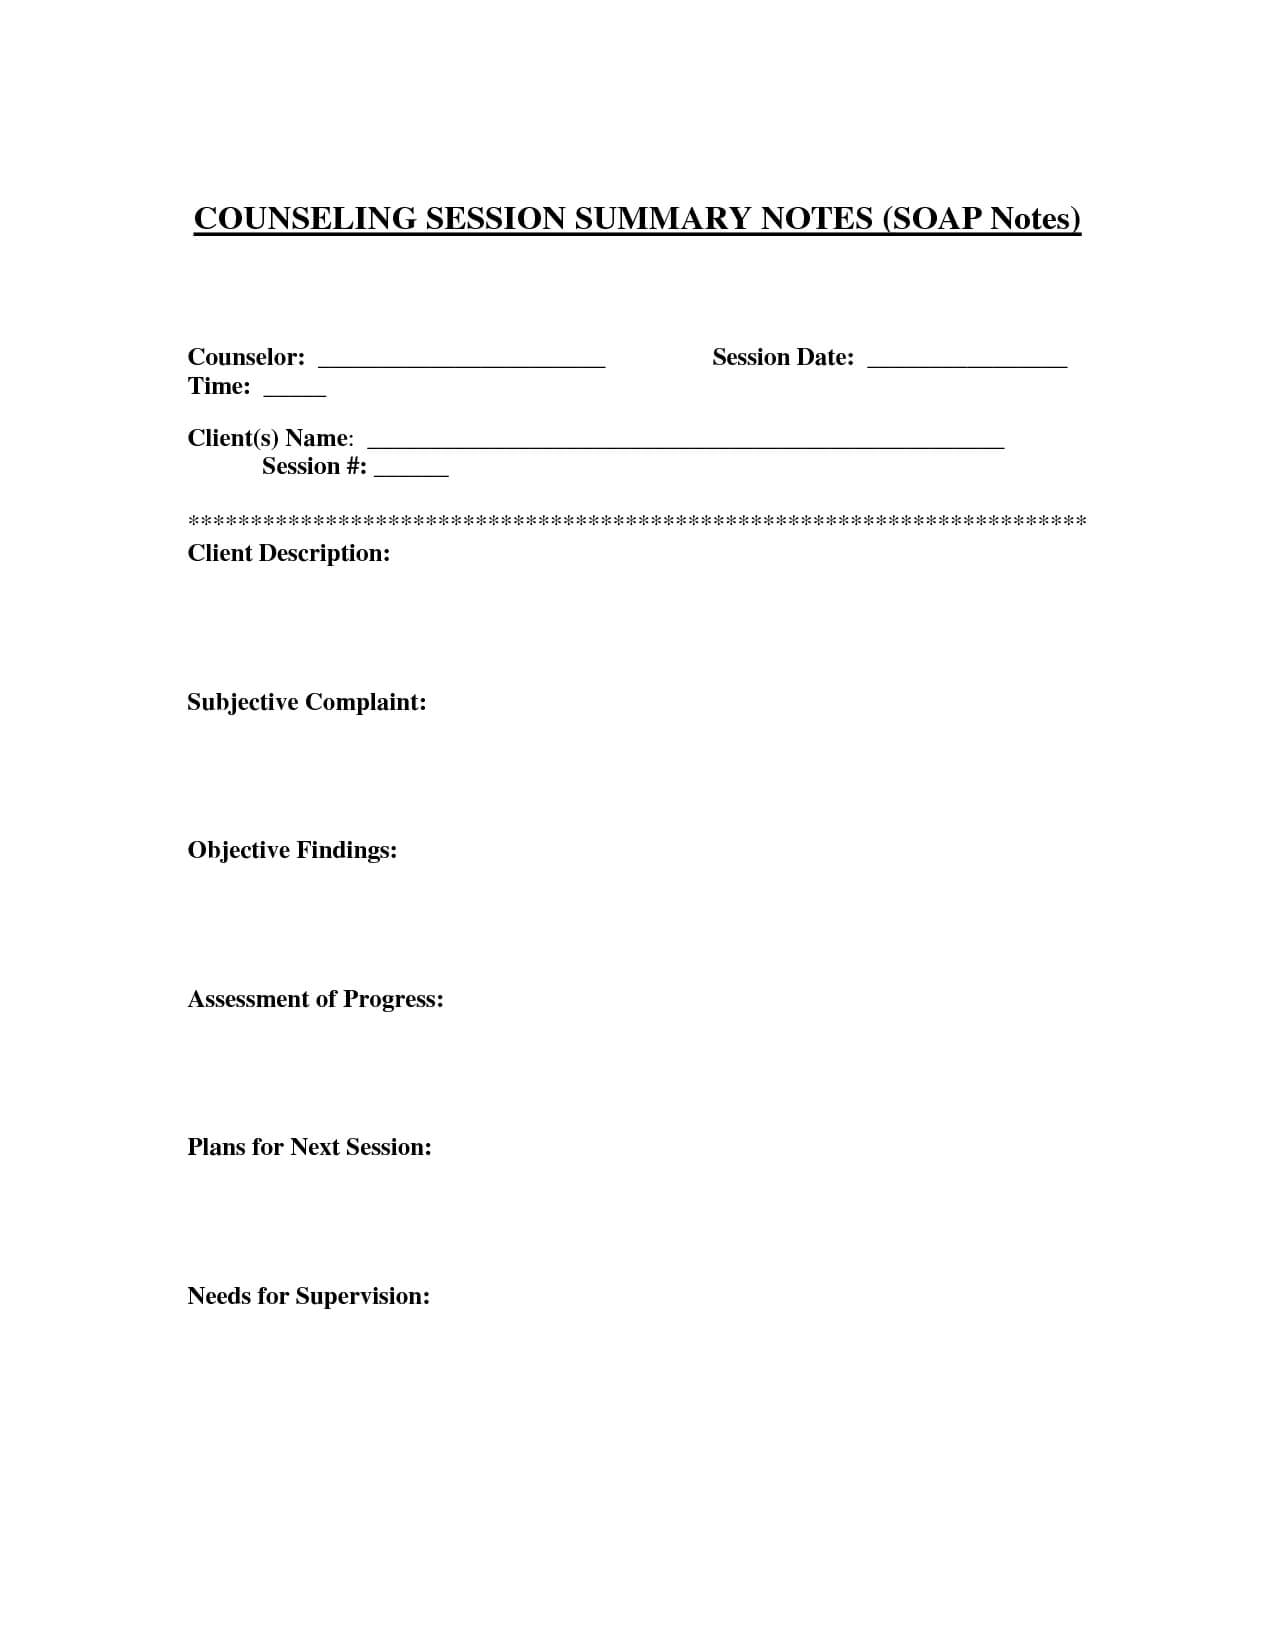 Counseling Session Notes Template | Soap Note, Treatment In Blank Soap Note Template